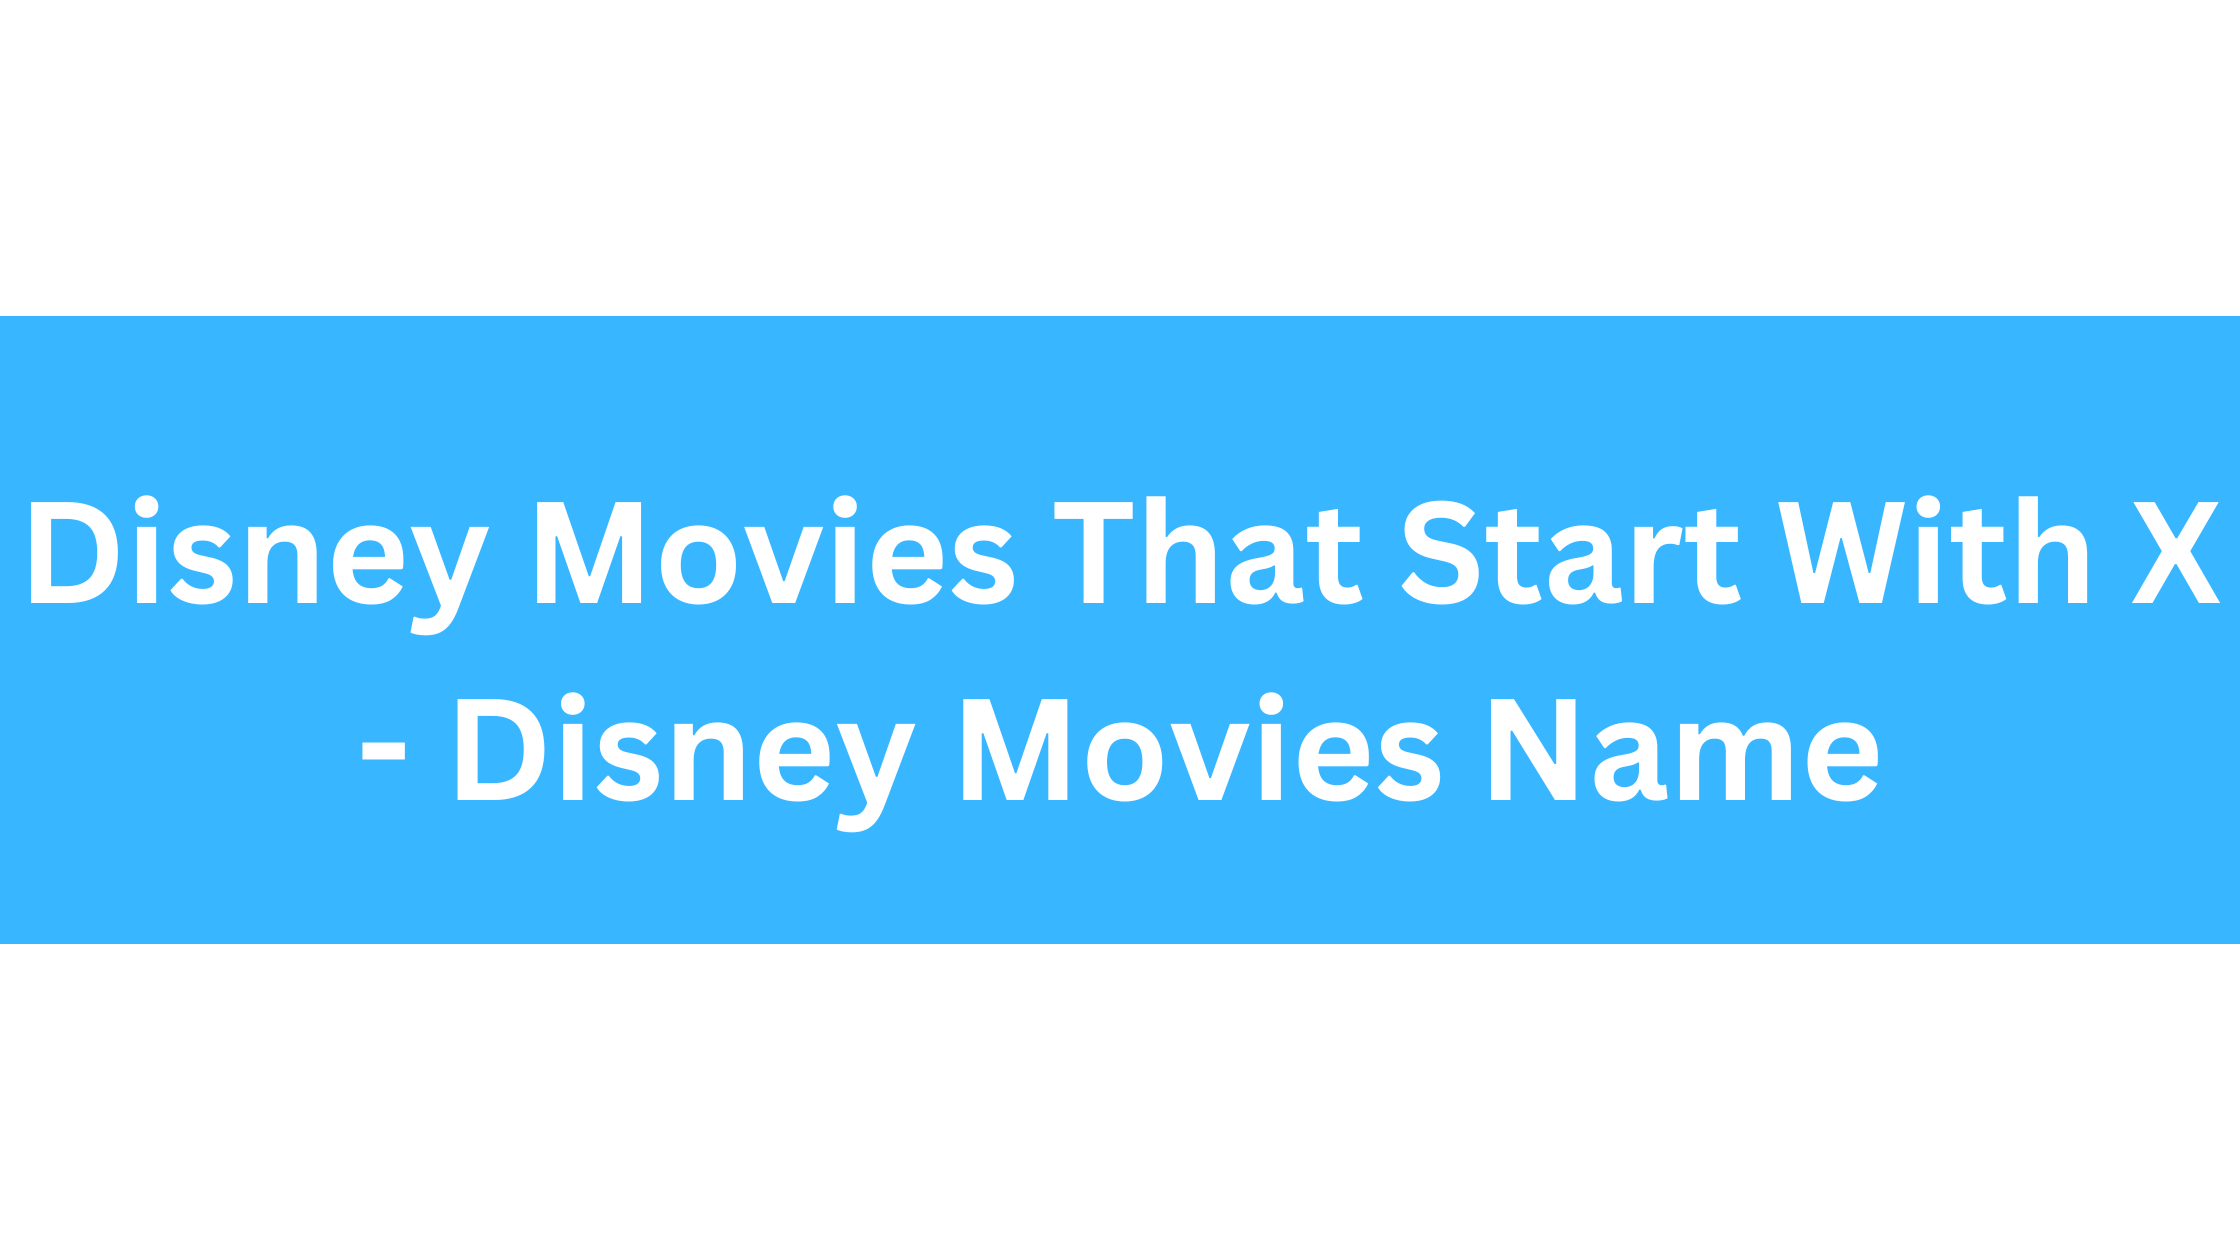 Disney Movies That Start With X